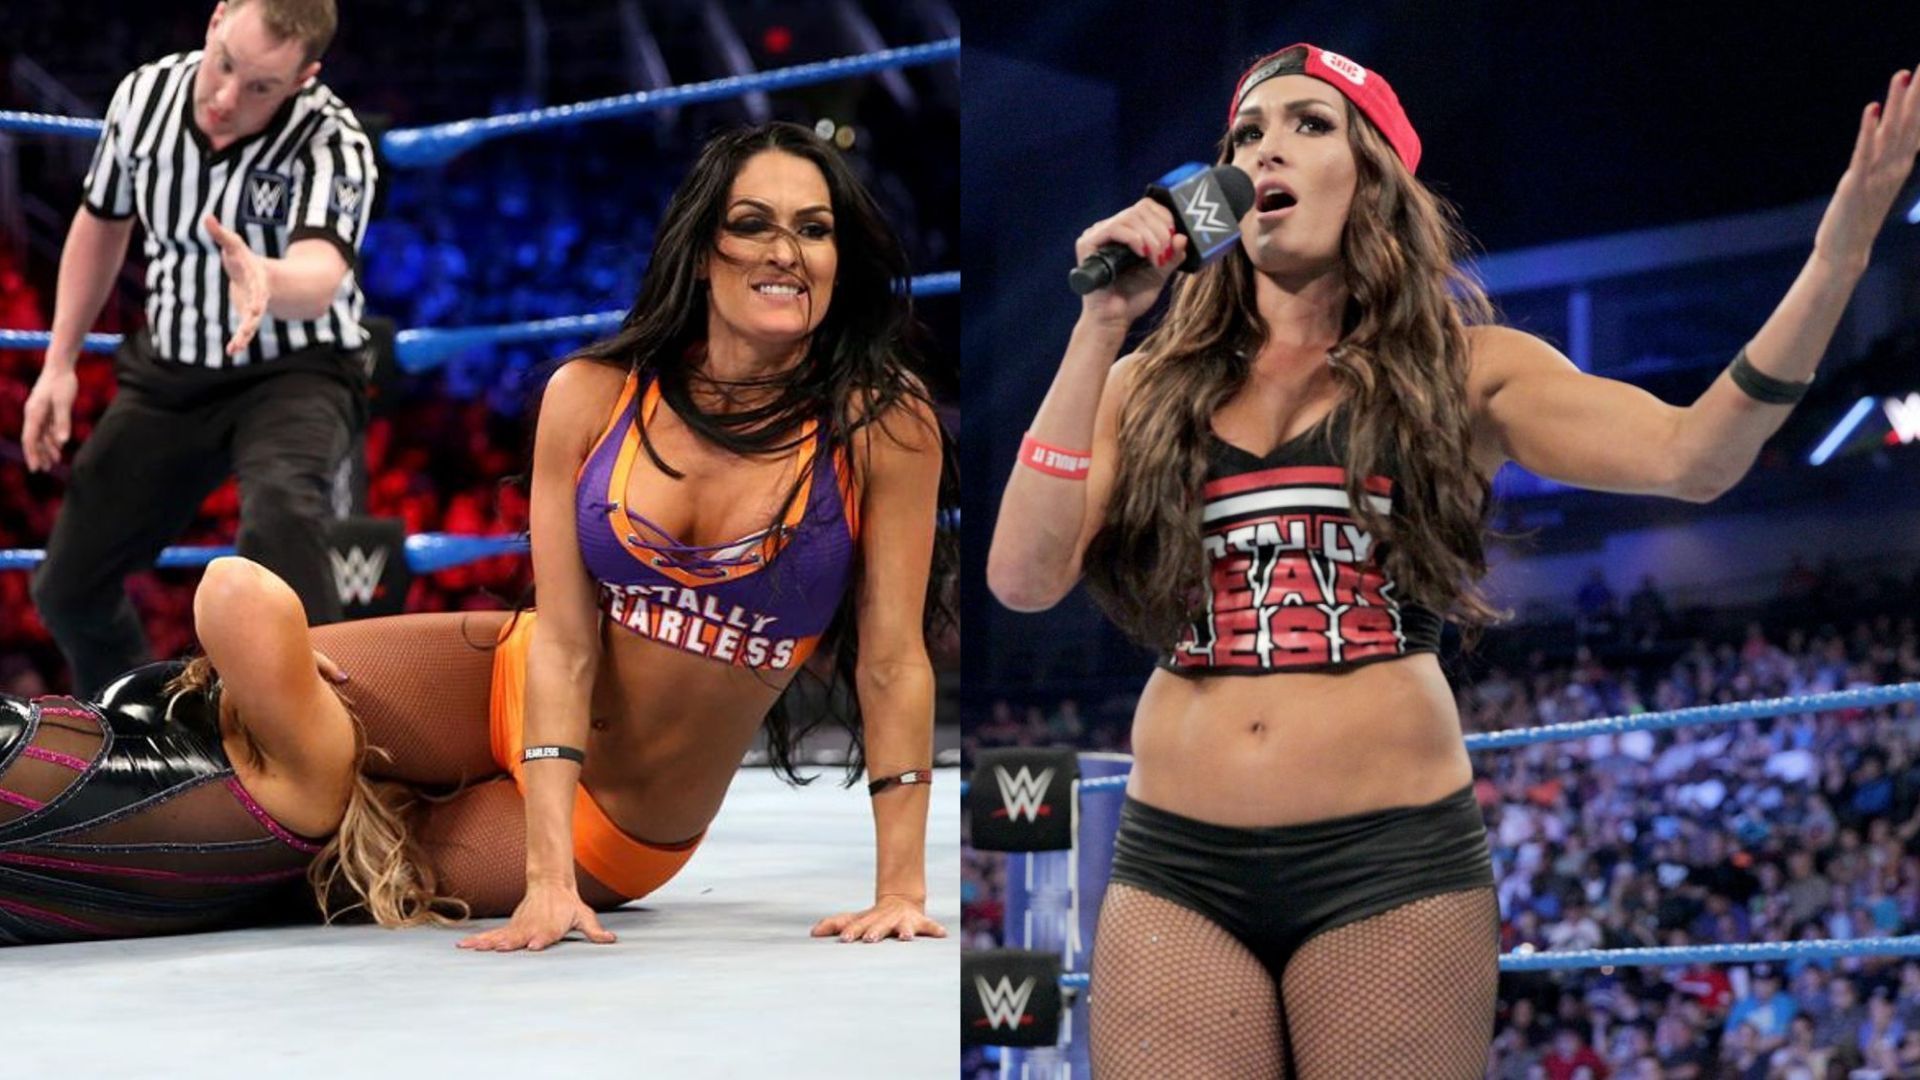 Nikki Bella is a WWE Hall of Famer and has shared the ring with notable superstars